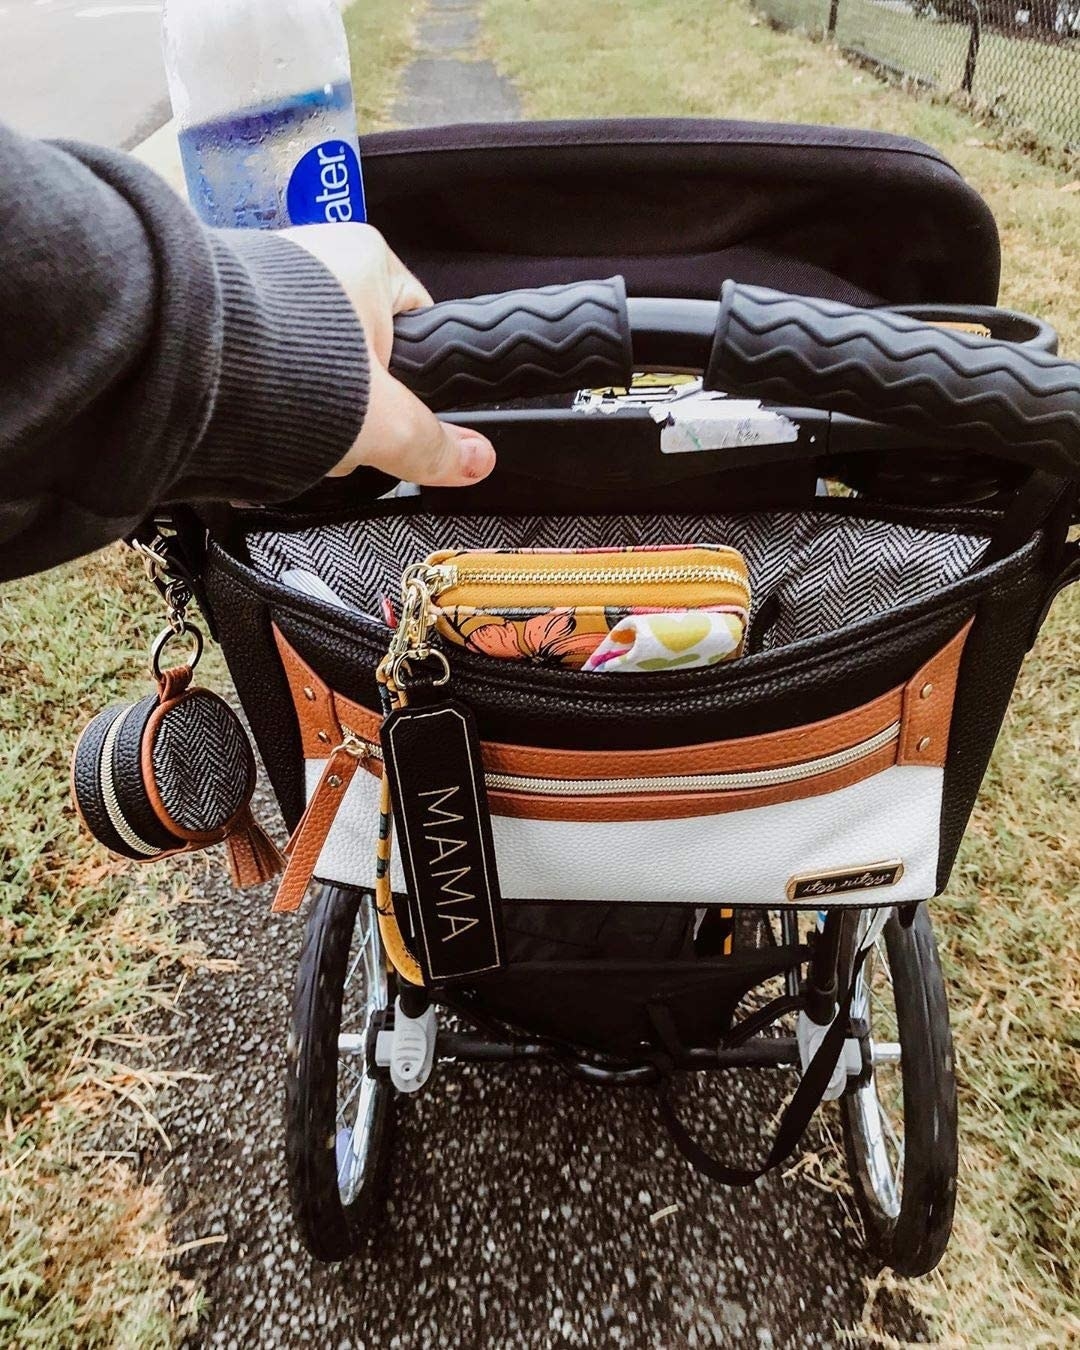 A person pushing a stroller with the bag on it